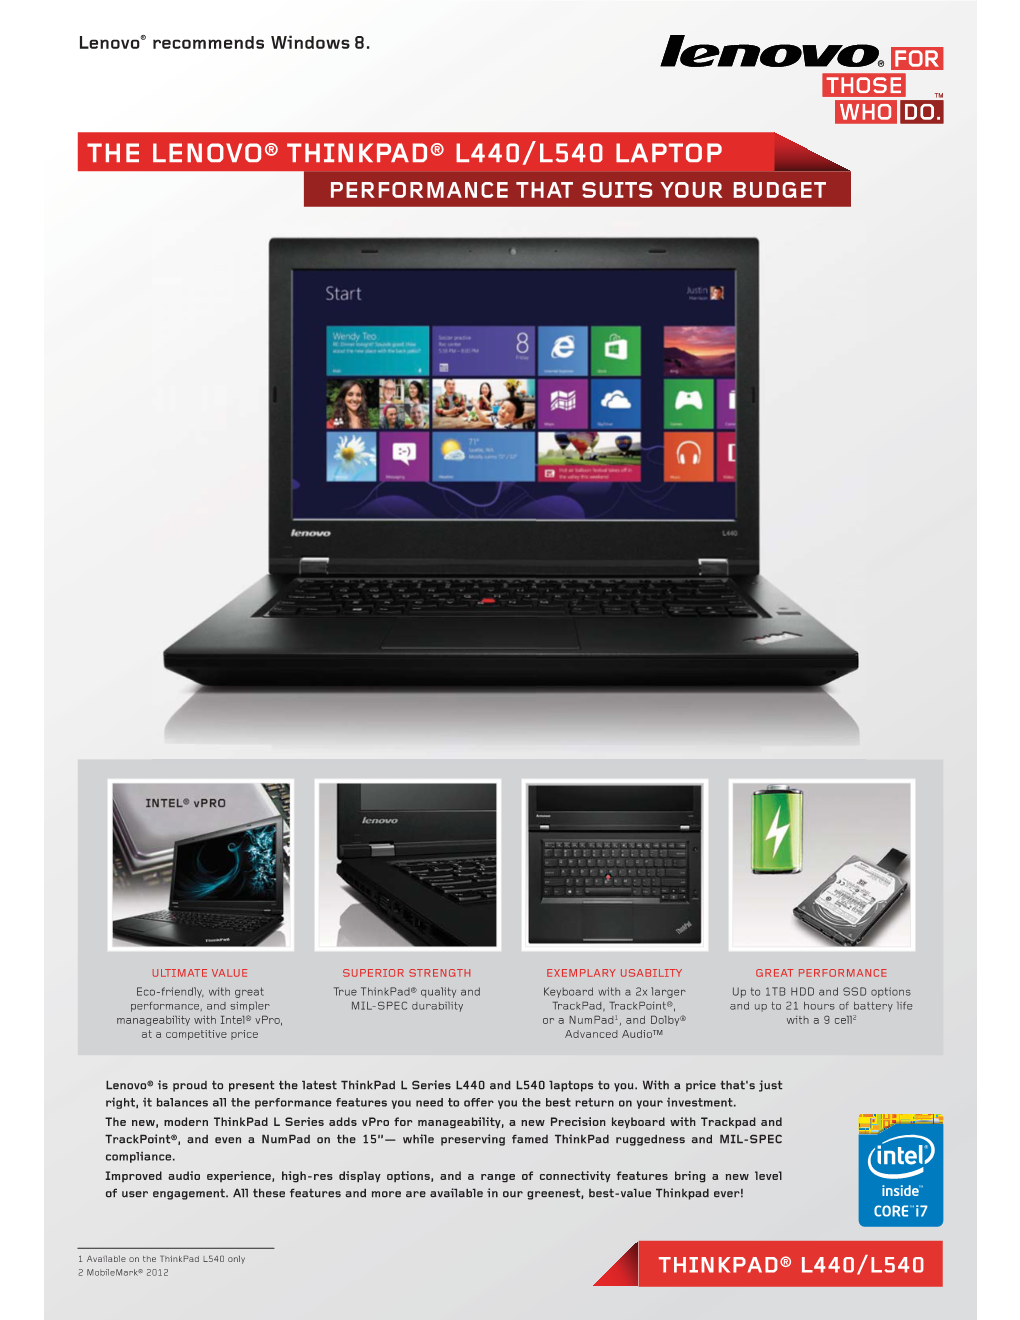 The Lenovo® Thinkpad® L440/L540 Laptop Performance That Suits Your Budget